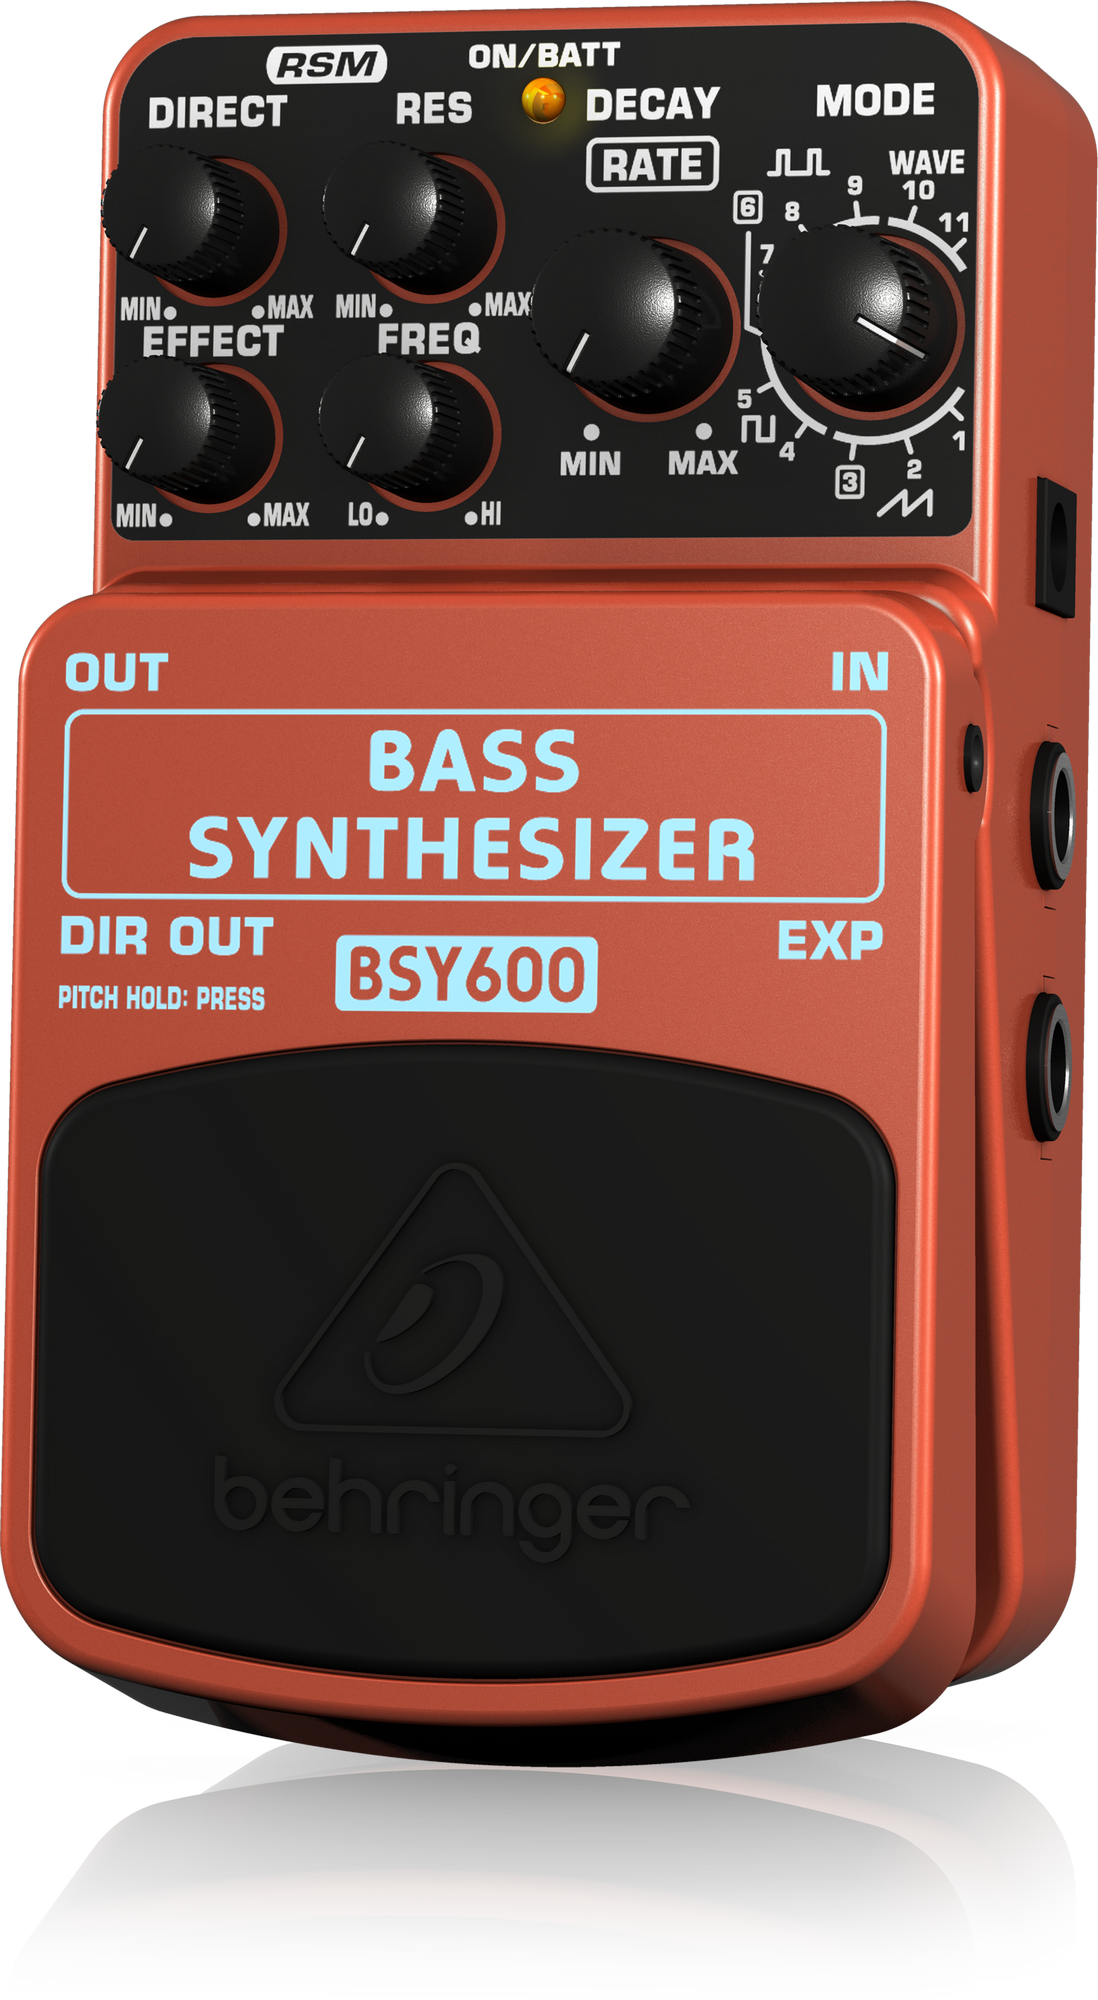 50%OFF! BSY600 Behringer Behringer (ベリンガー) Synthesizer BSY600 Pedal Bass  Bass Synthesizer ペダル